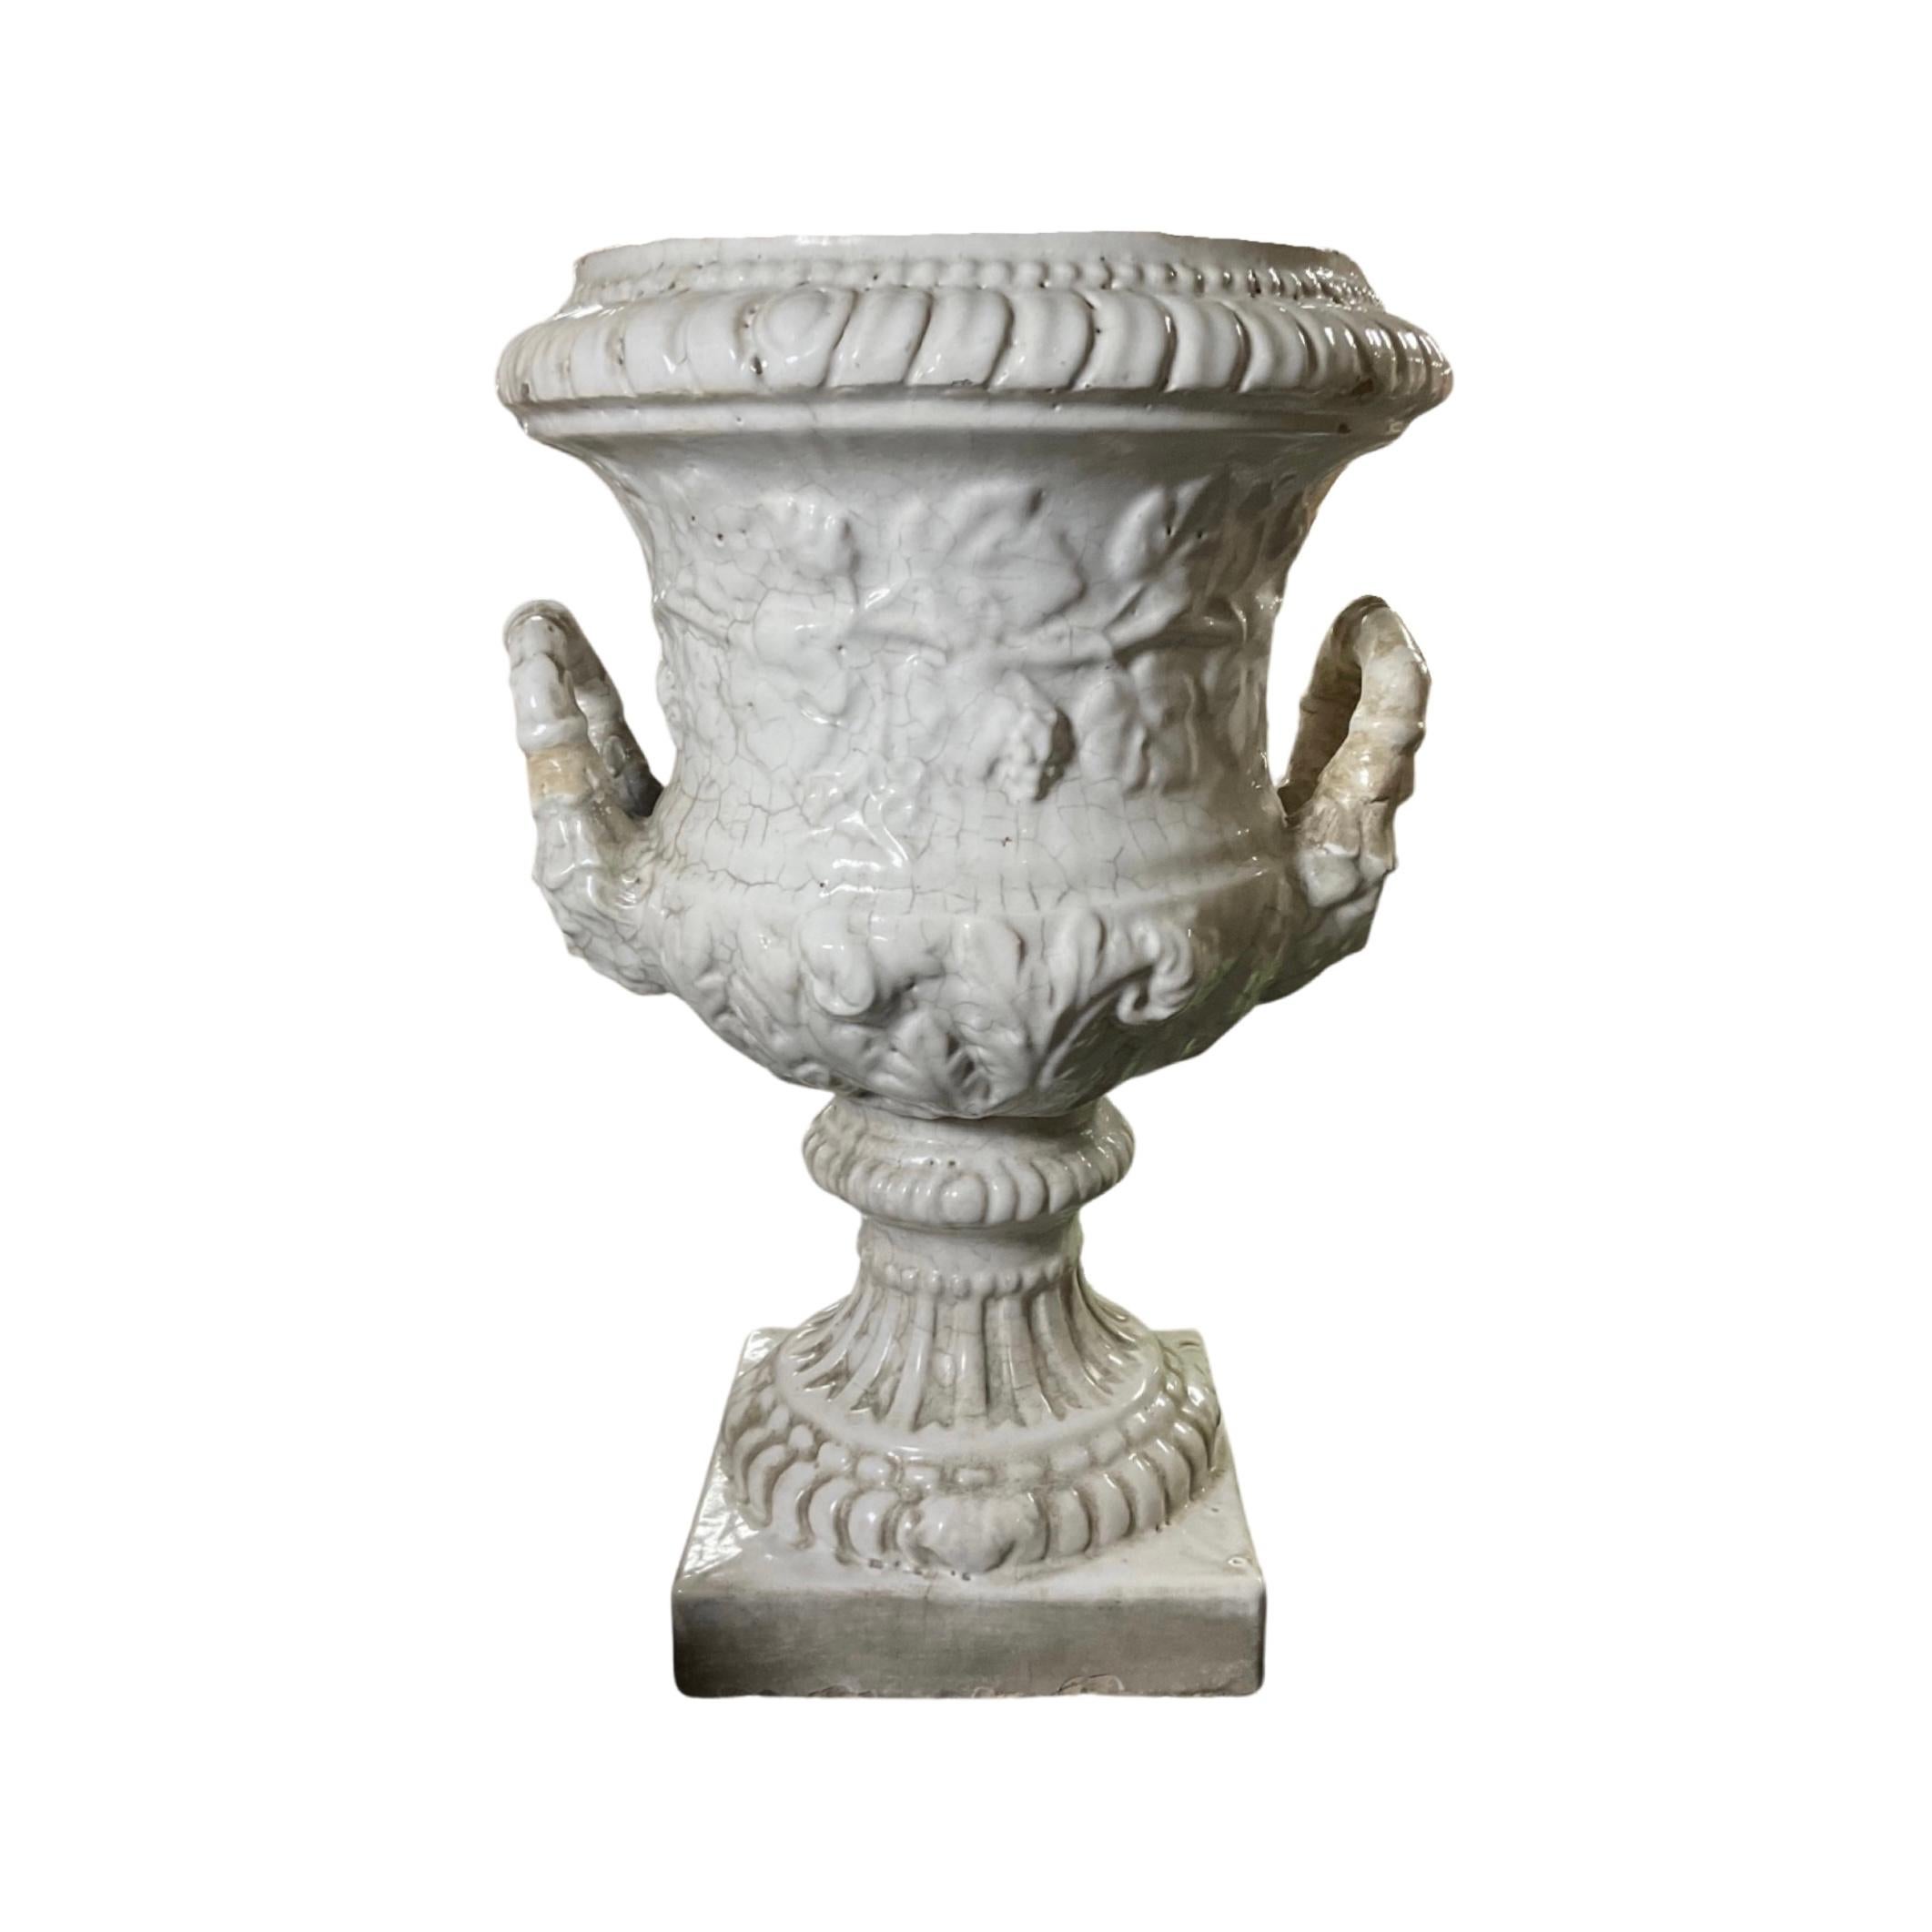 Handcrafted from terracotta in France, this 19th century glazed planter will add timeless charm to your garden. Its white glaze and antique design make it the perfect accent to any outdoor space. Planter features 2 side handles.